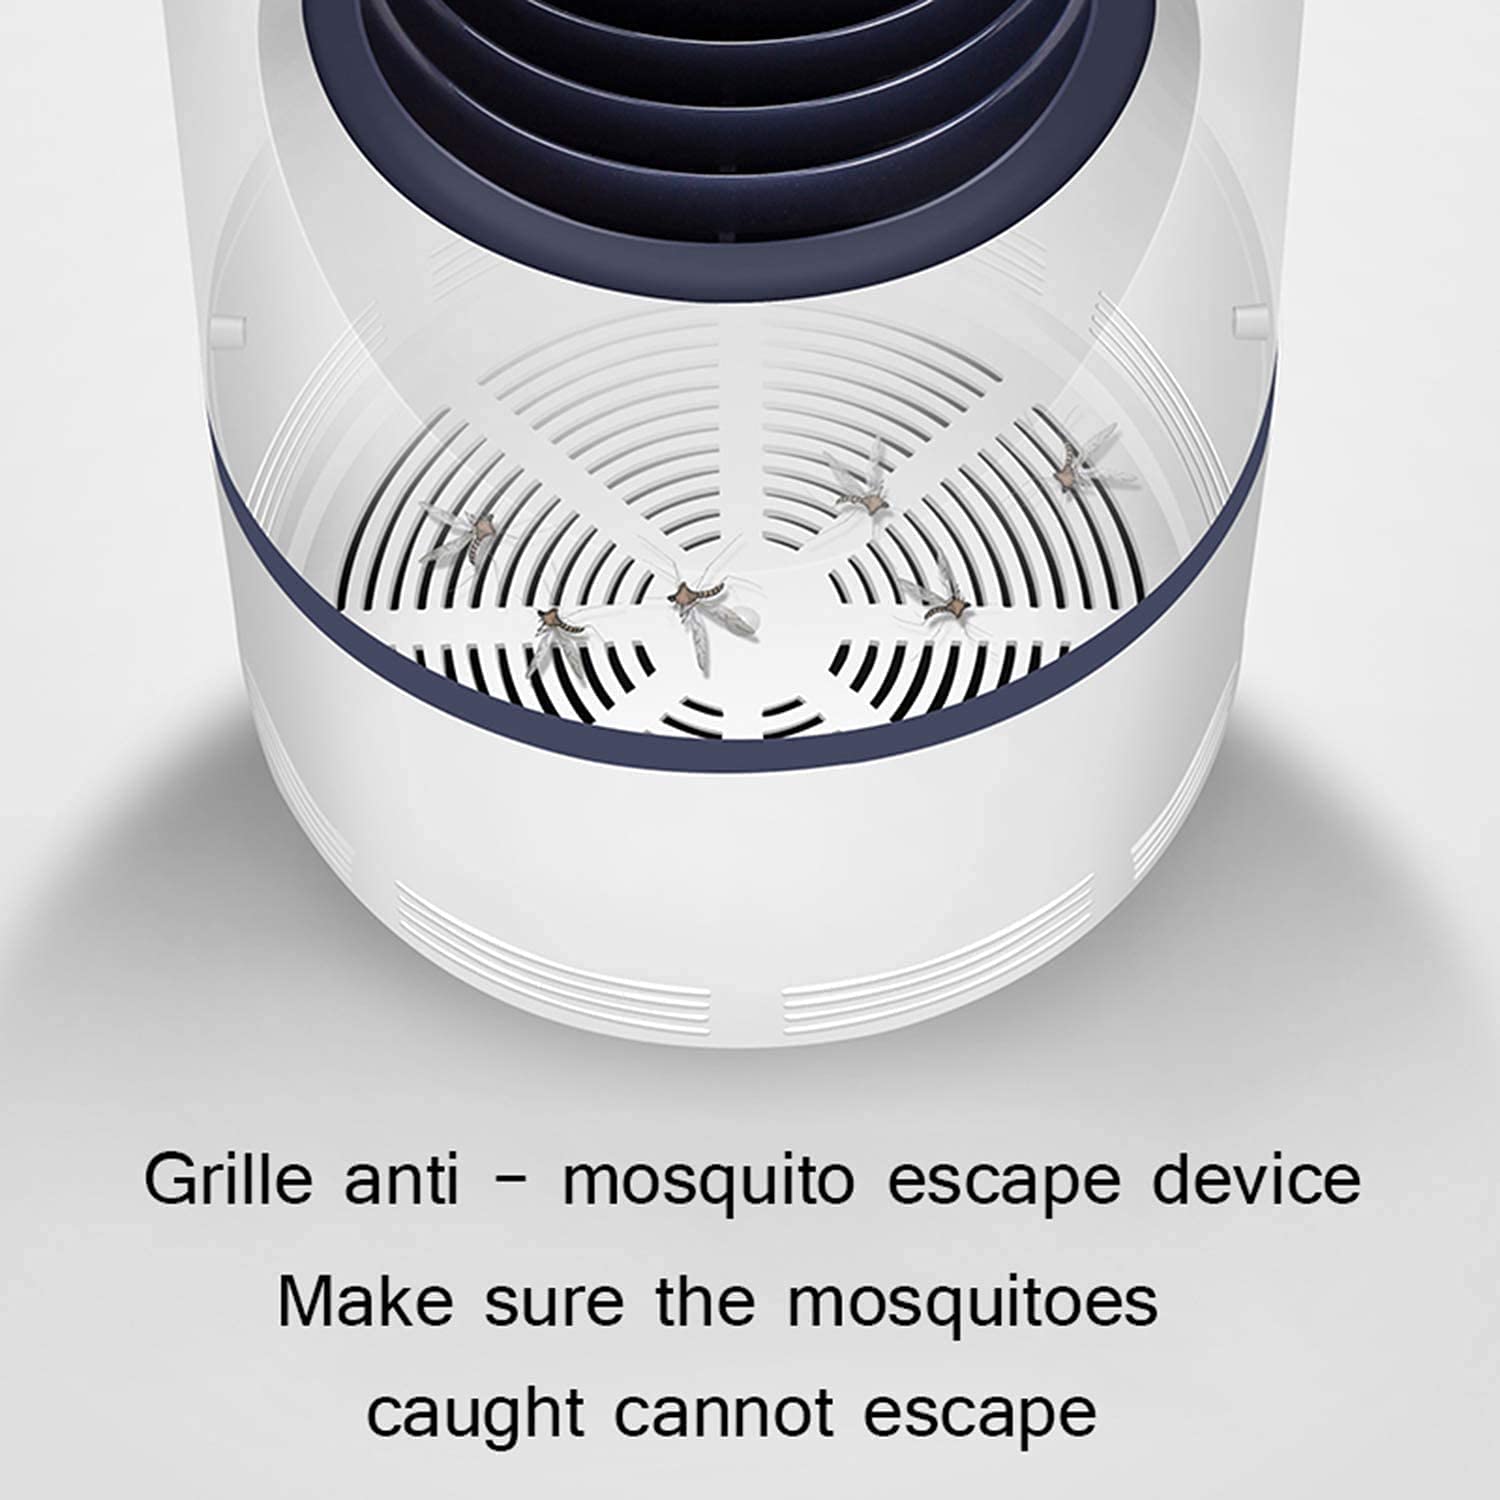 Ckyuna Indoor Mosquito Trap Mosquito Killer Trap USB Mosquito Lamp, Effectively Trapping Mosquitoes, Gnats, Flies, Tiny Insects, LED Night Light for Home Bedroom Office (White)